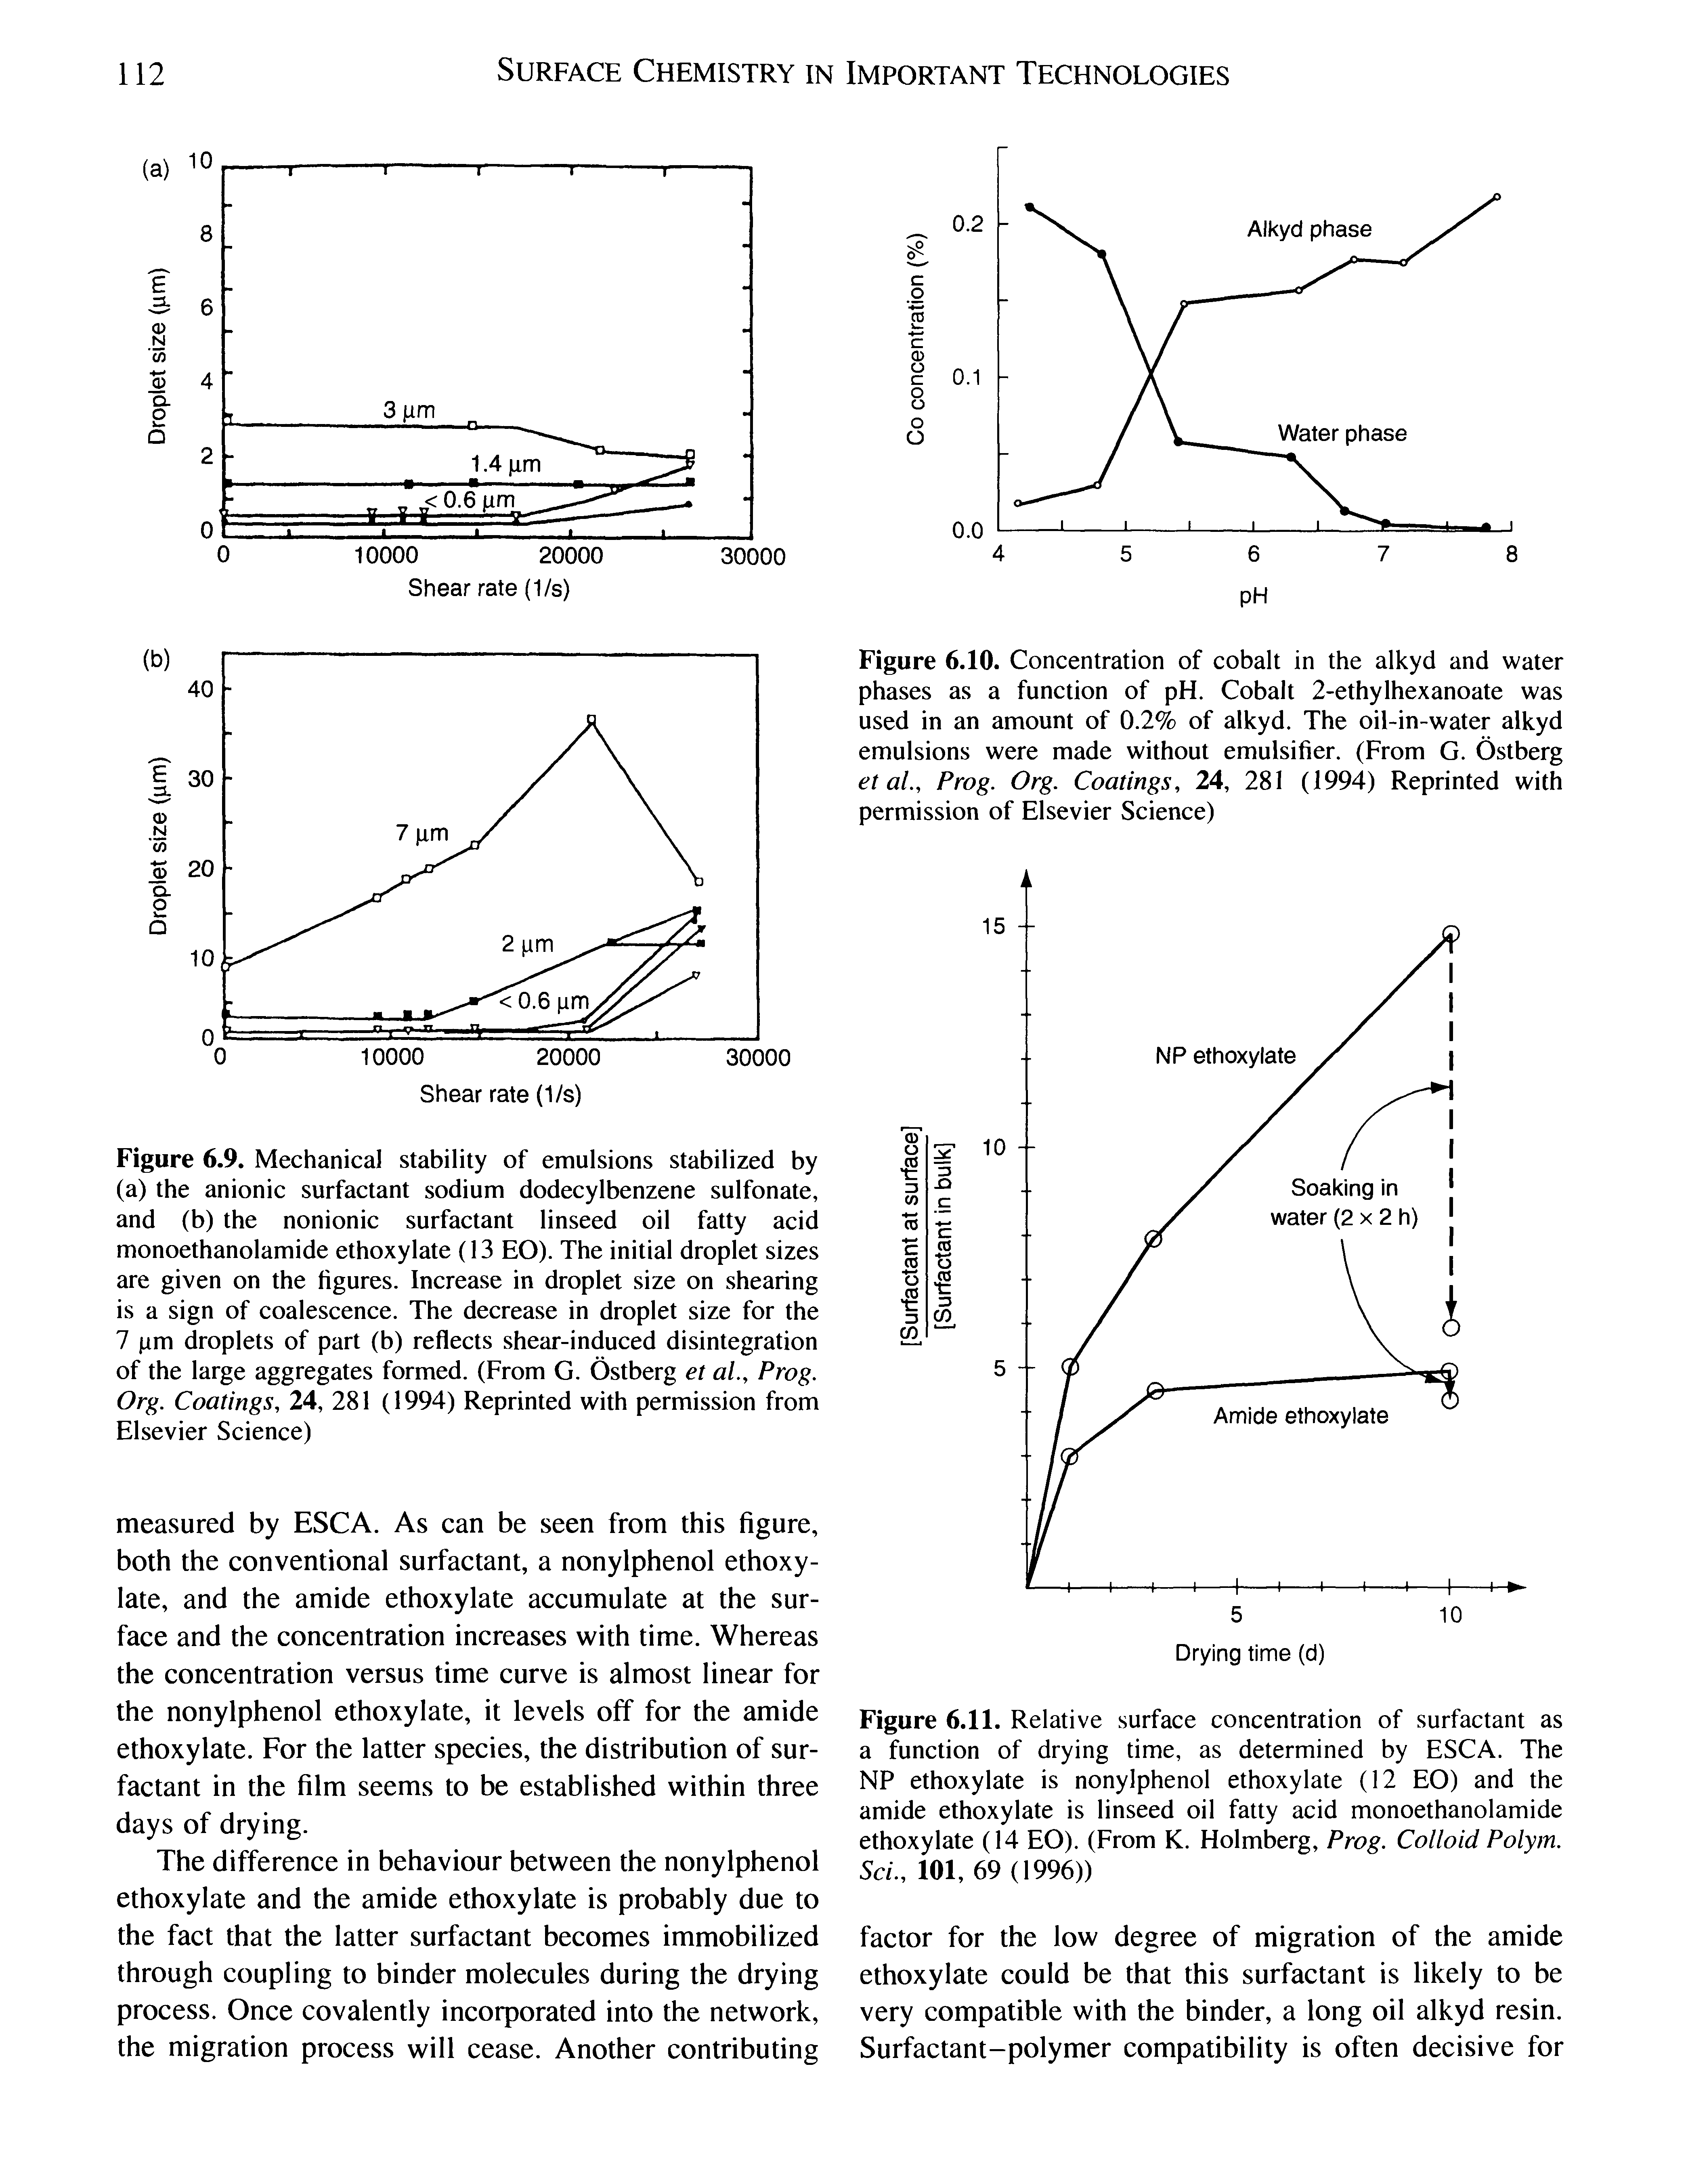 Figure 6.10. Concentration of cobalt in the alkyd and water phases as a function of pH. Cobalt 2-ethylhexanoate was used in an amount of 0.2% of alkyd. The oil-in-water alkyd emulsions were made without emulsifier. (From G. Ostberg et aL, Prog. Org. Coatings, 24, 281 (1994) Reprinted with permission of Elsevier Science)...